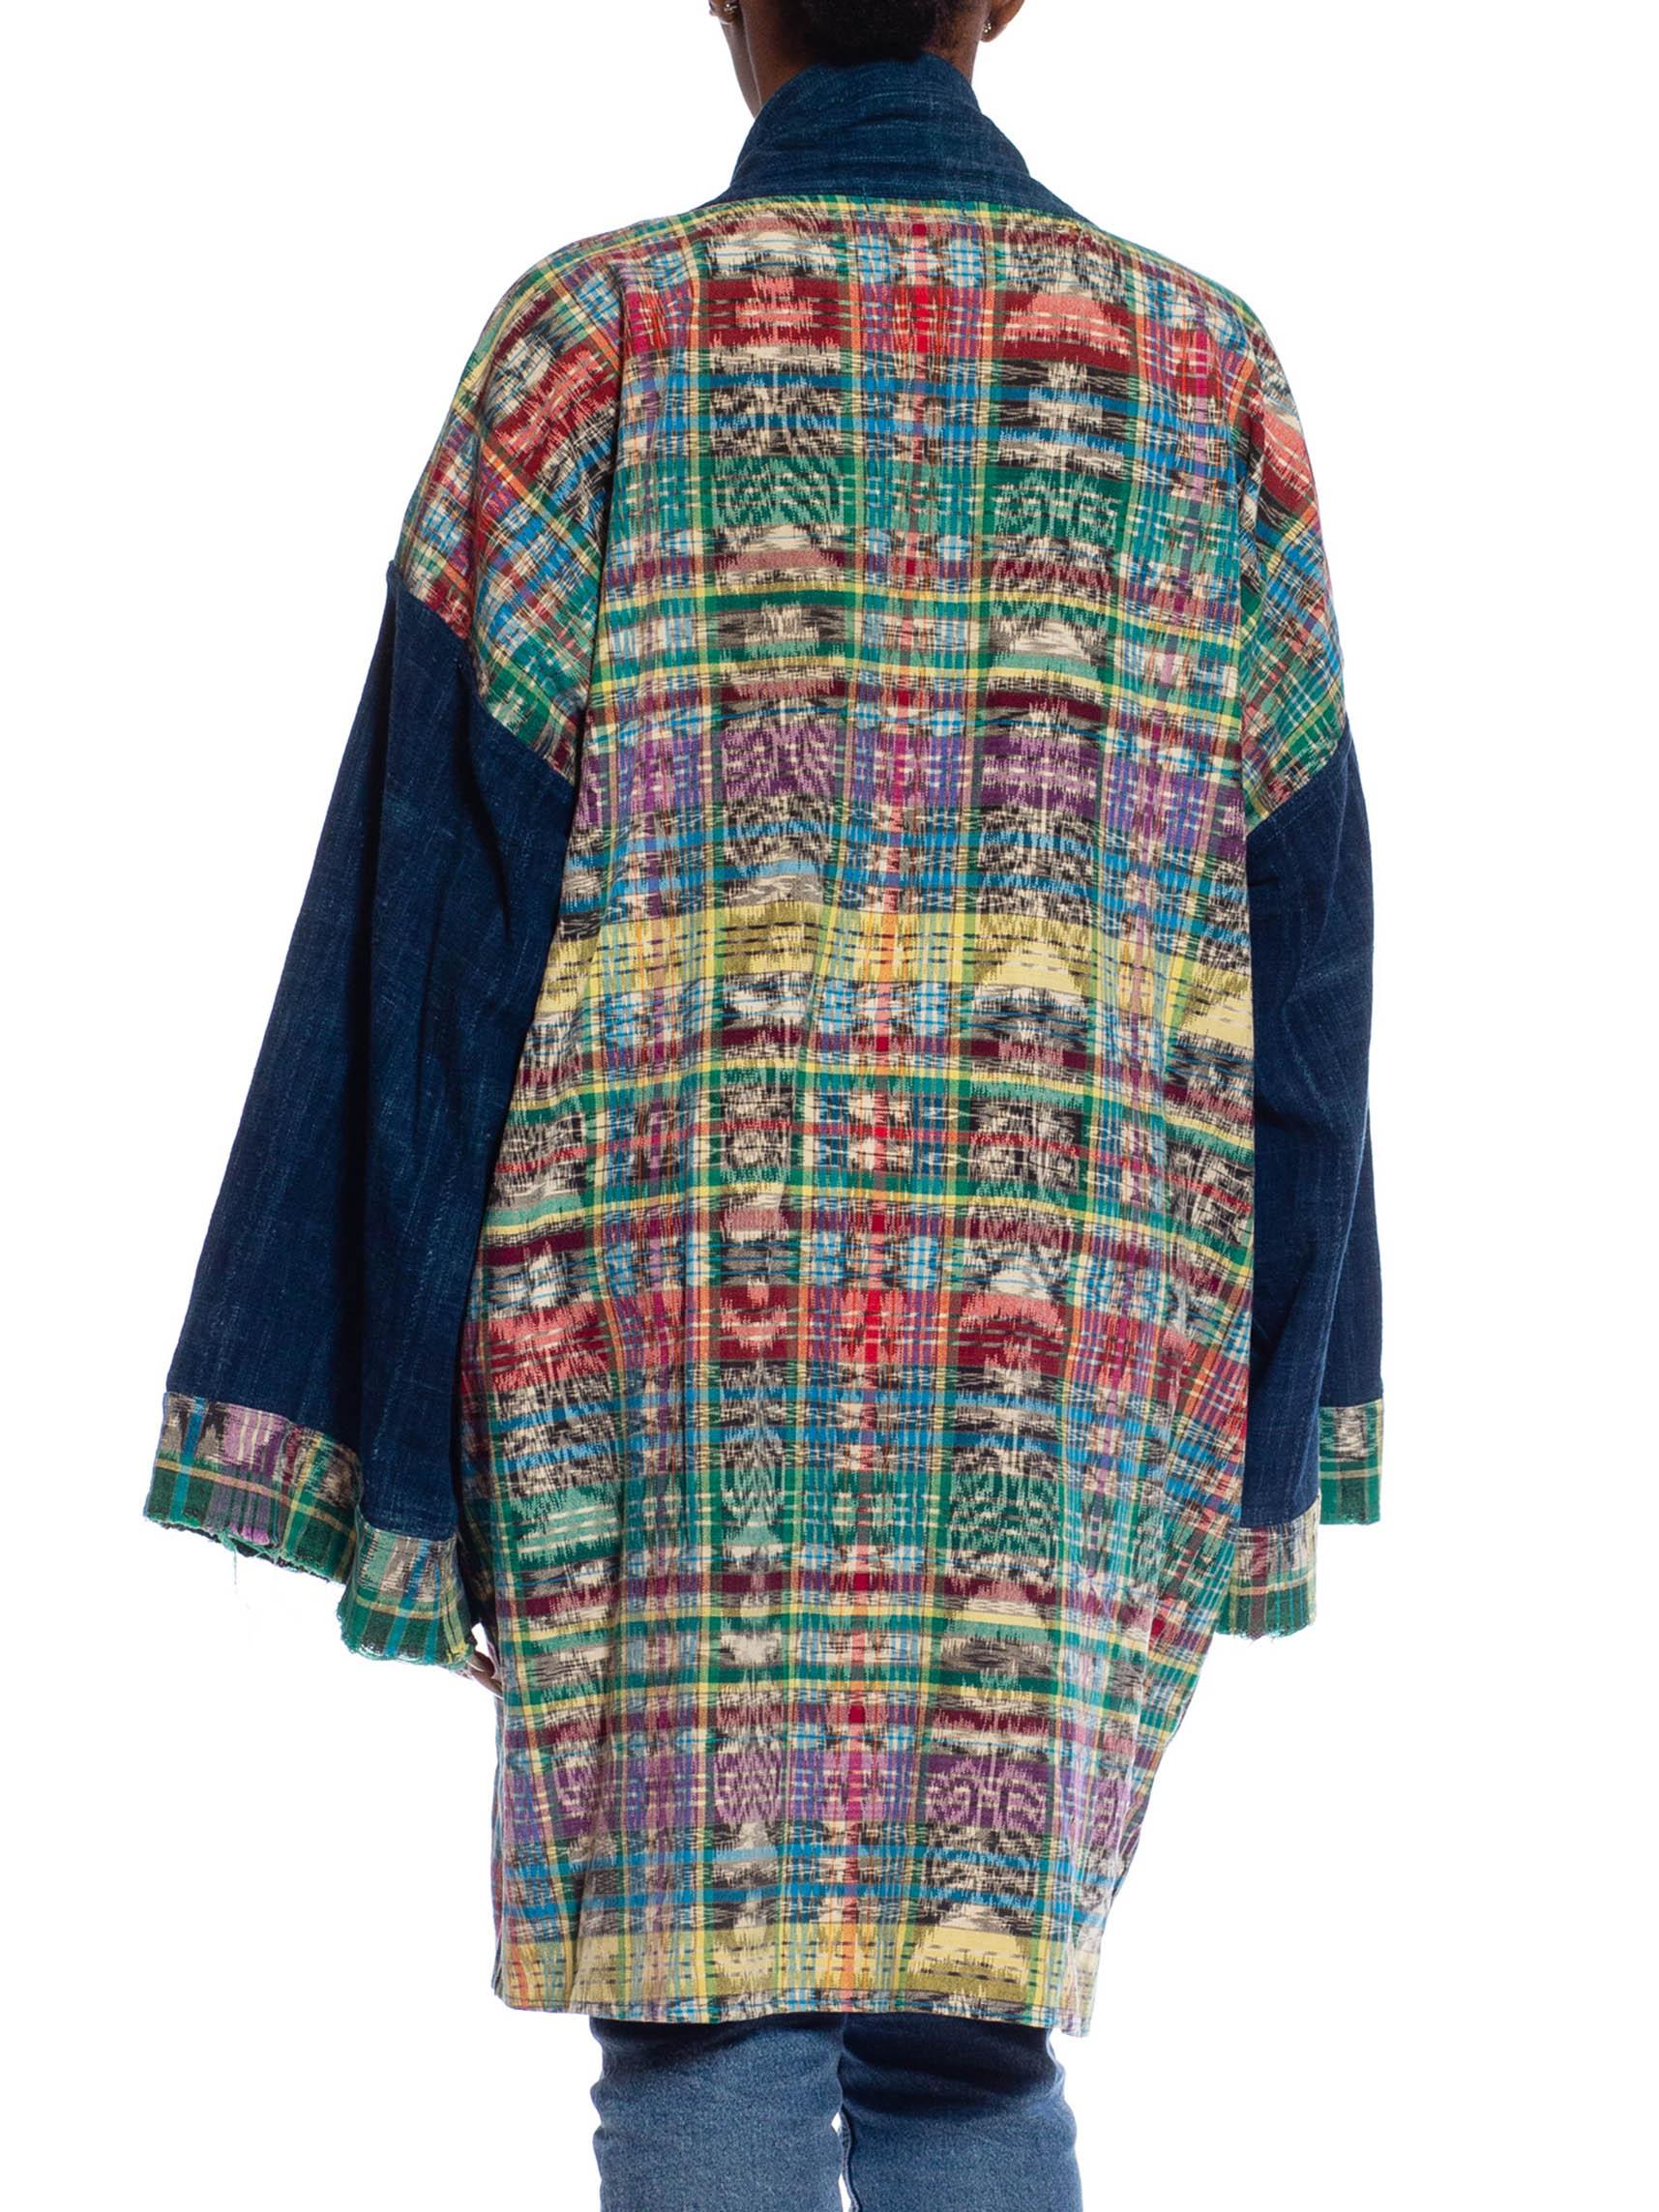 Women's or Men's MORPHEW COLLECTION Navy Blue Multi African Cotton & Hand-Woven Guatemalan Ikat  For Sale